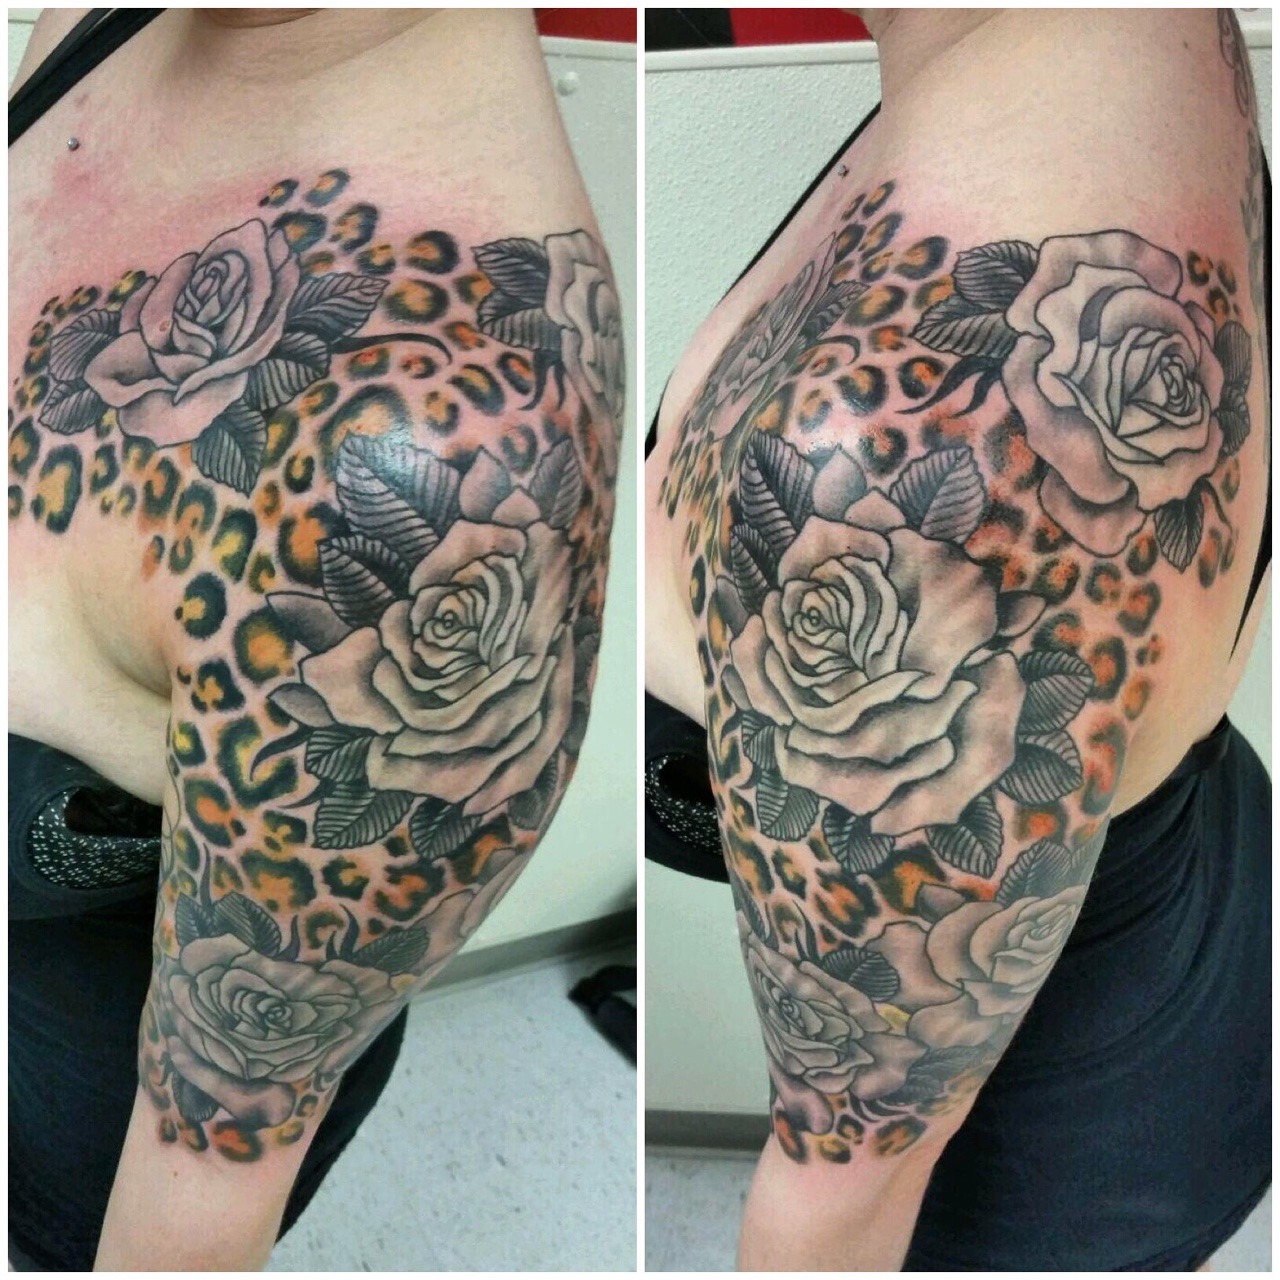 Hot Rod Tattooing — Leopard print and roses all finished up by Corey...